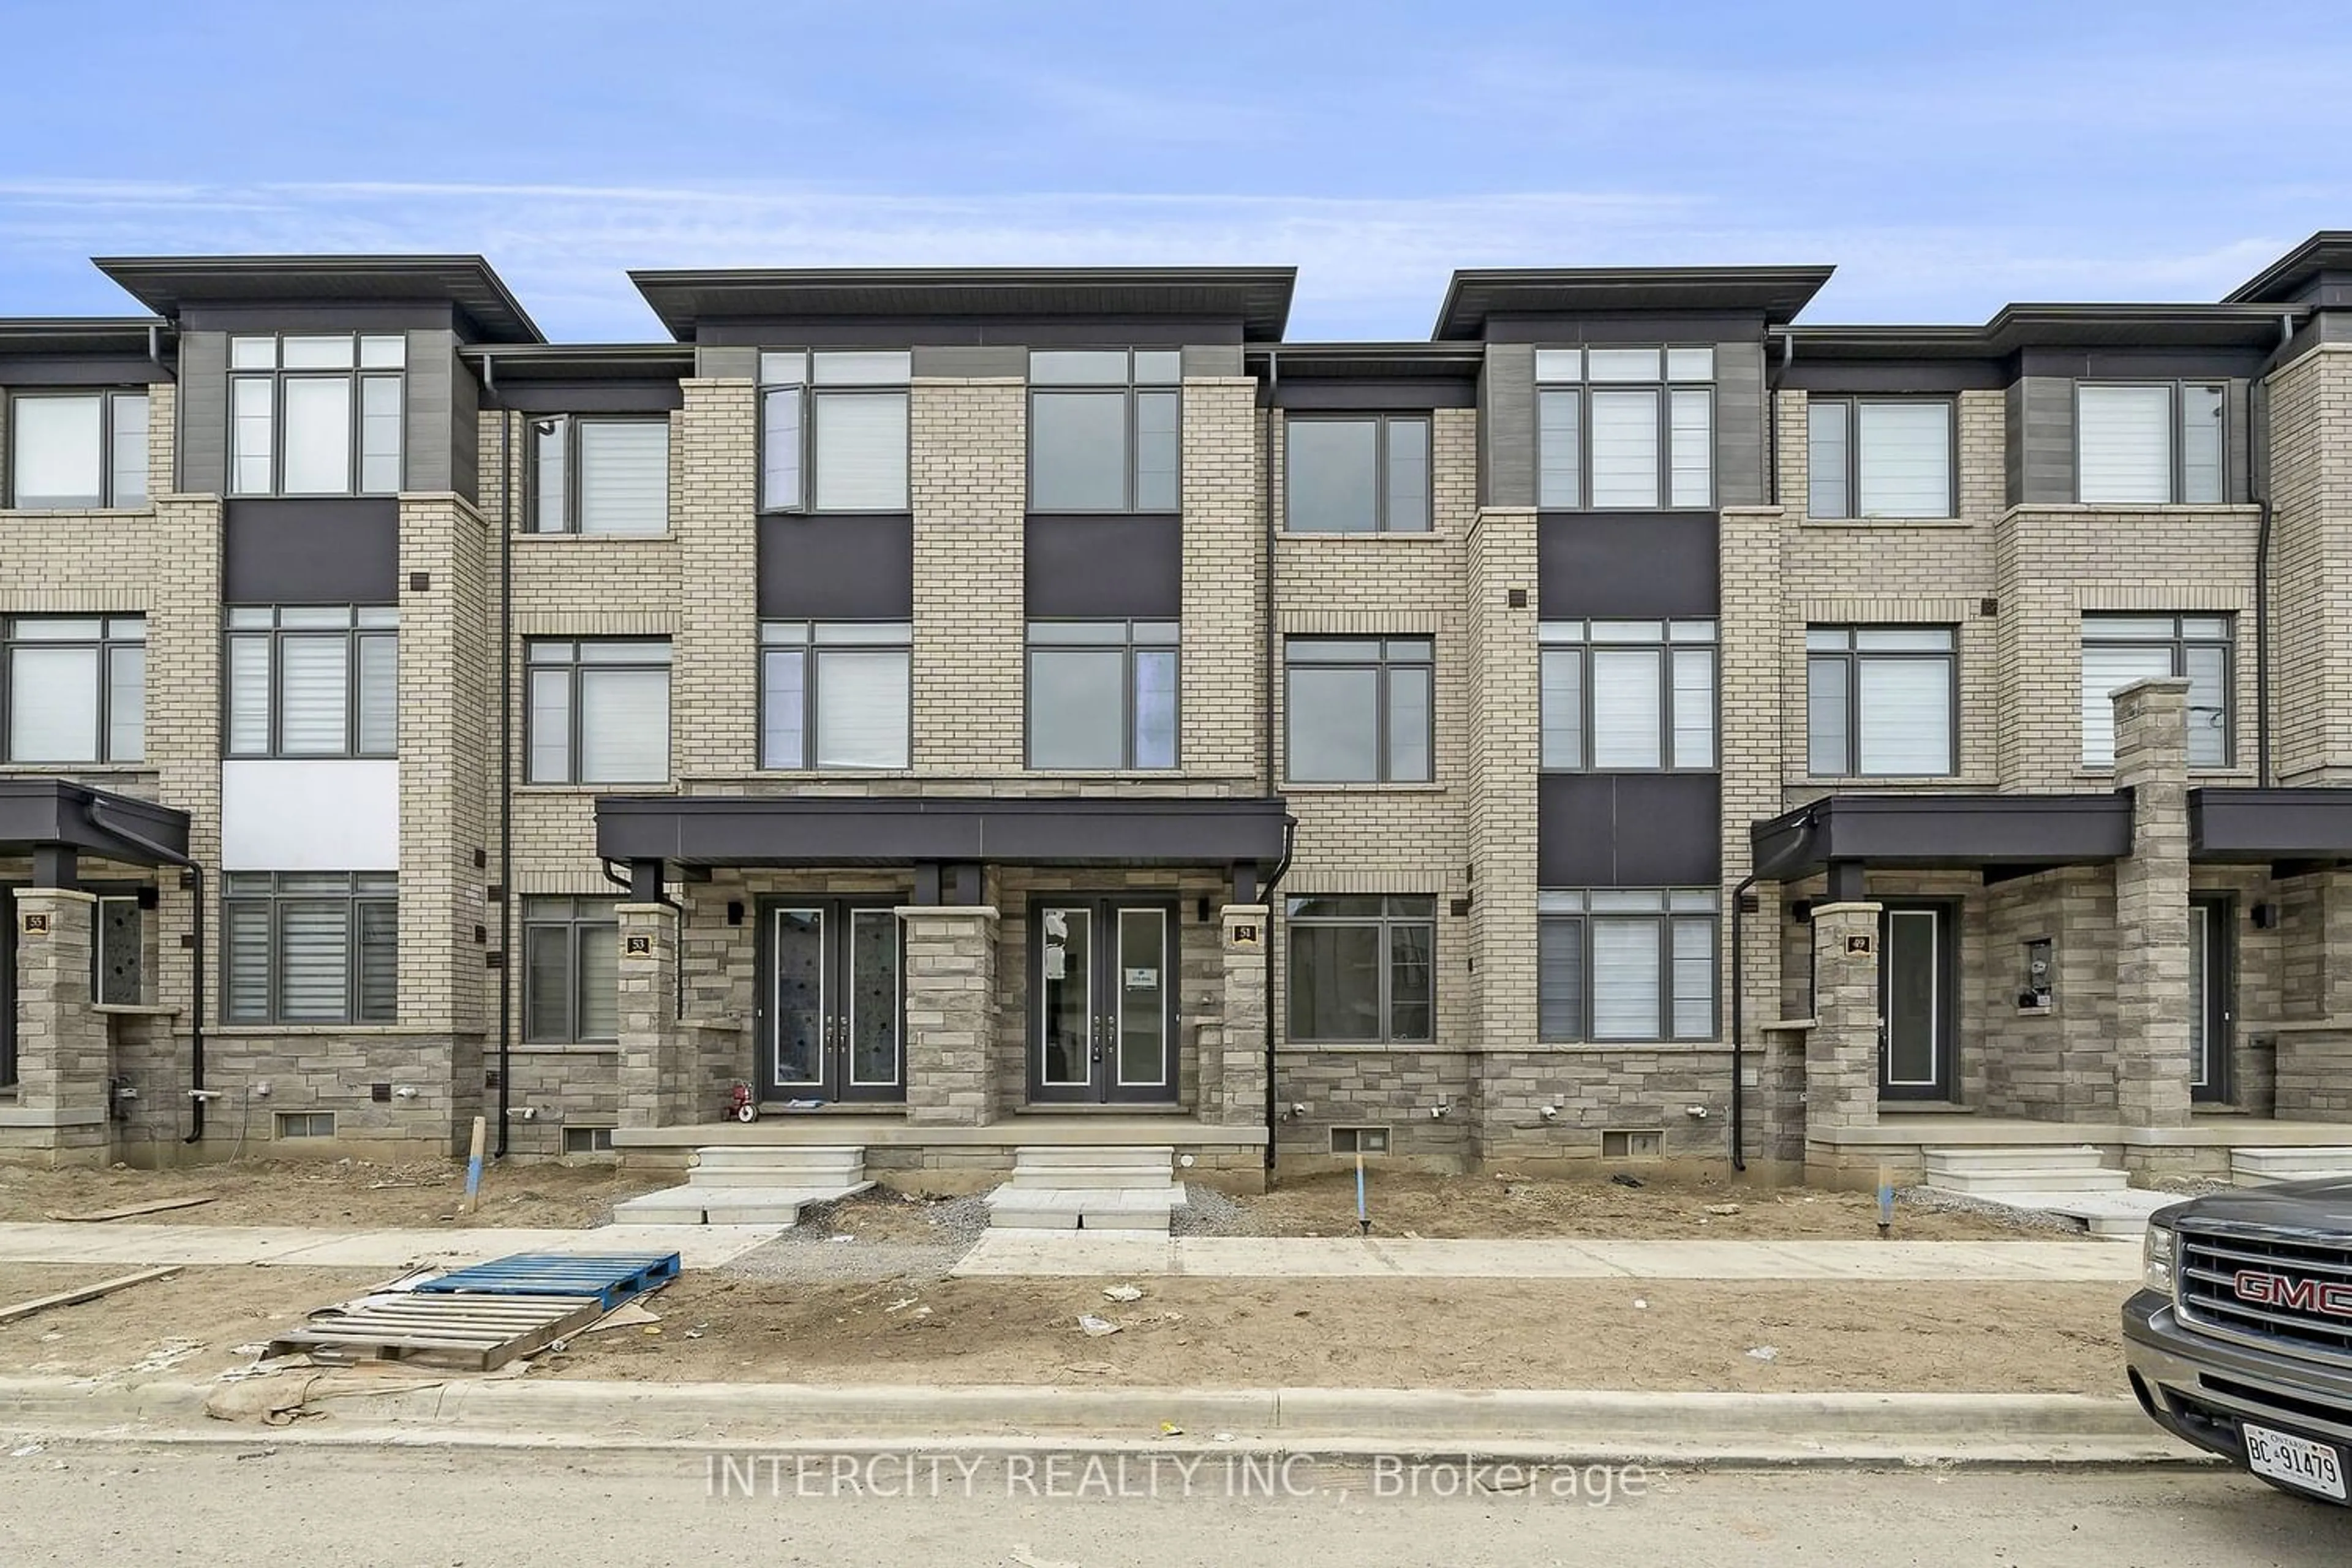 A pic from exterior of the house or condo for 51 Minnock St, Caledon Ontario L7C 4K8